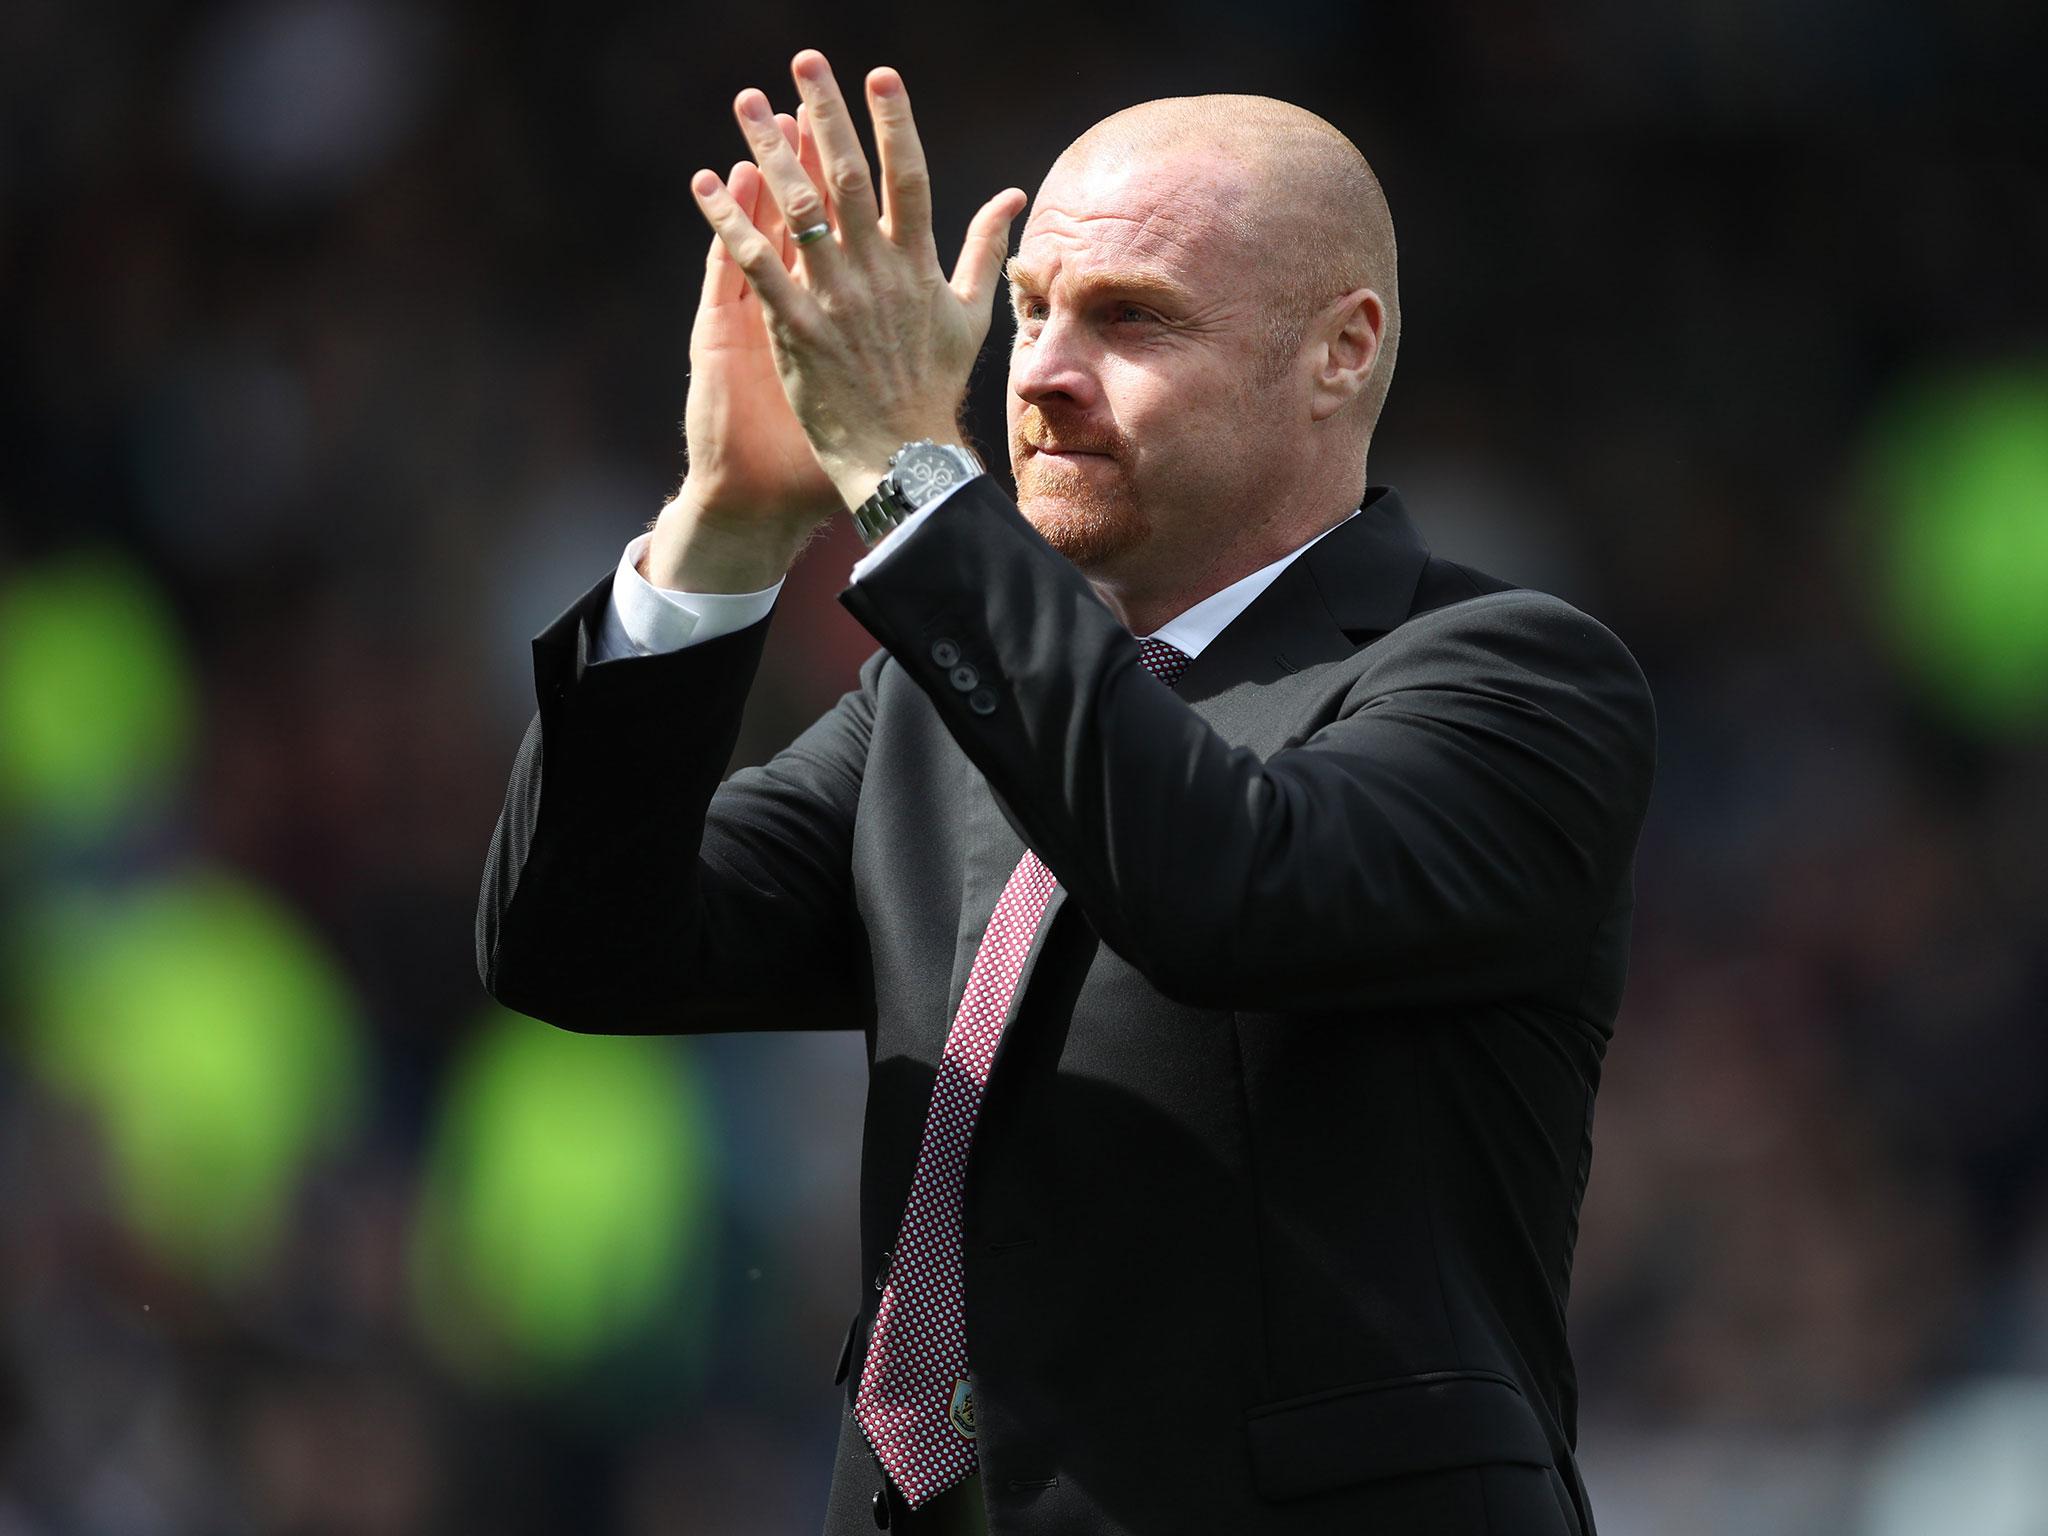 Sean Dyche is understood to have a release clause of £1m